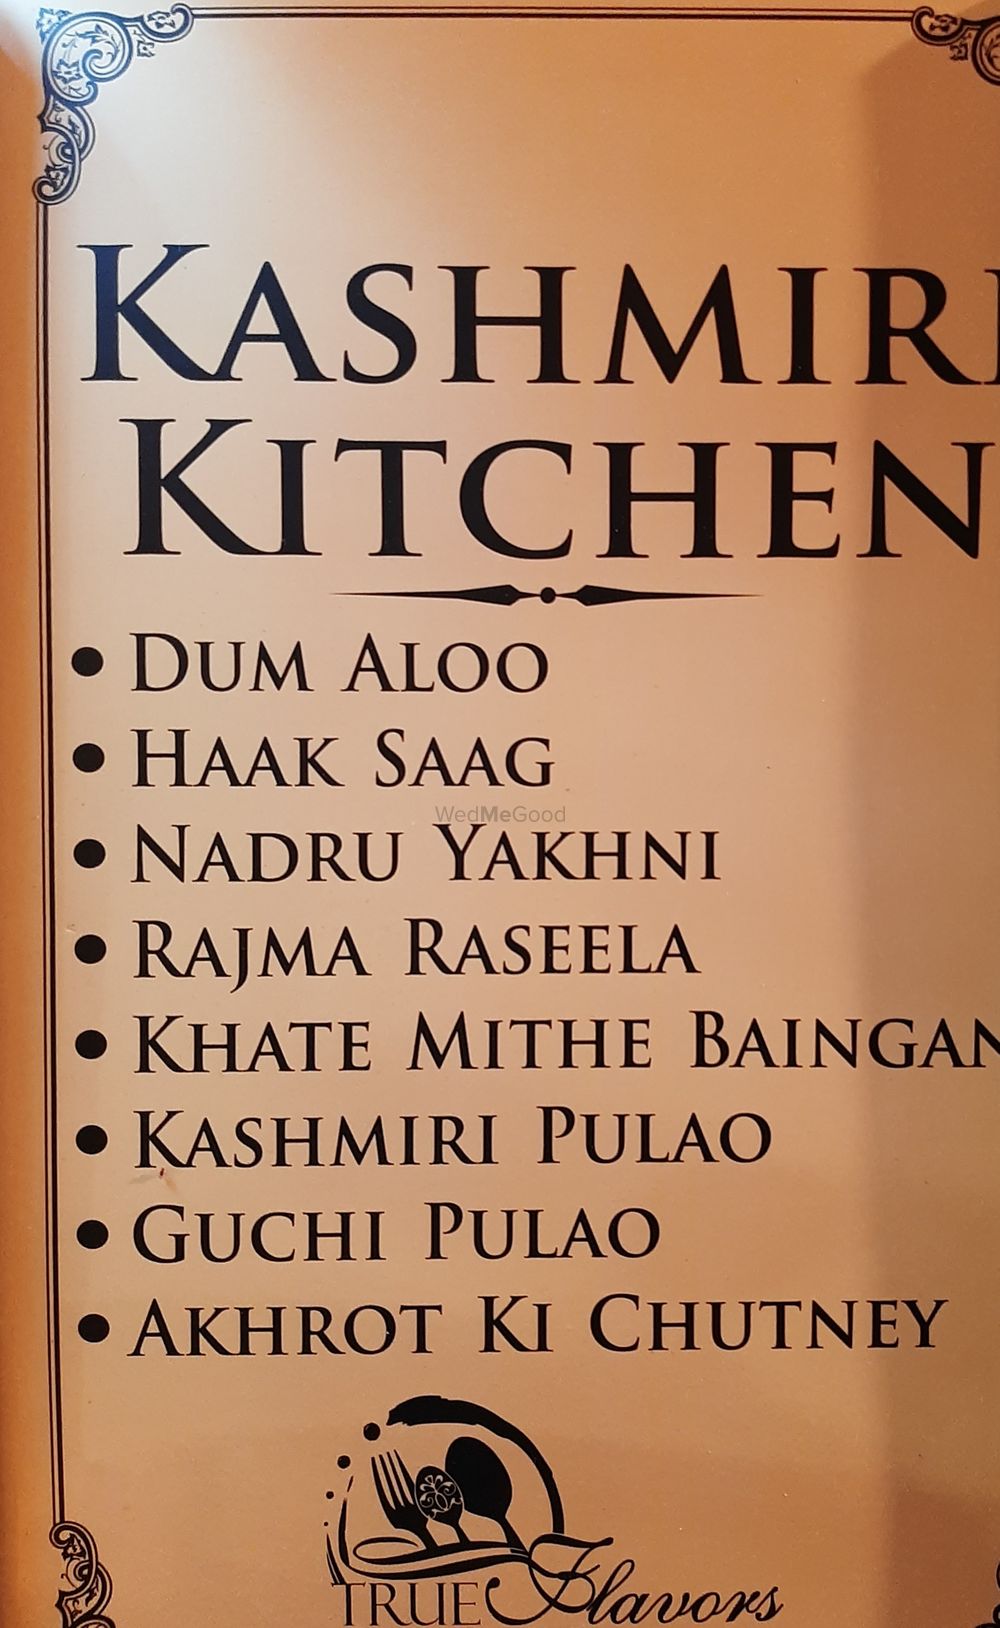 Photo From kashmiri wazwan Cuisine catering / Events - By Flavours of Kashmir